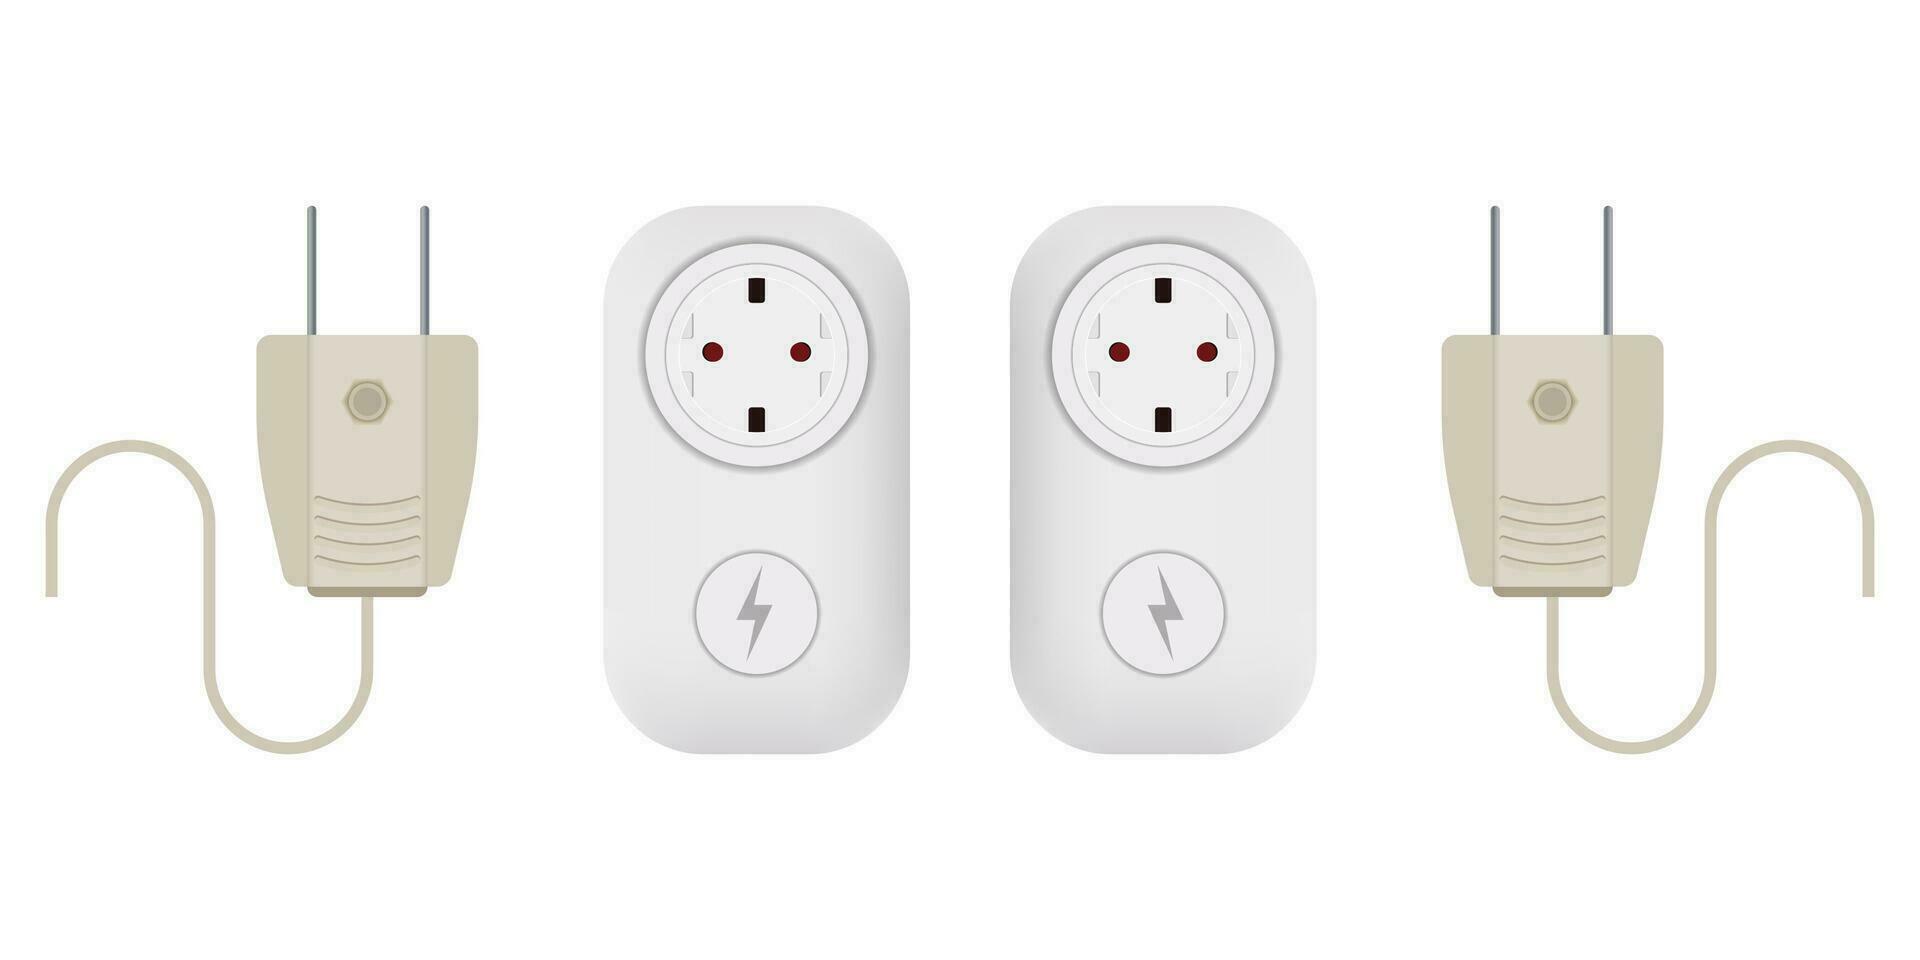 Electric plug icon in vector shape on a white background